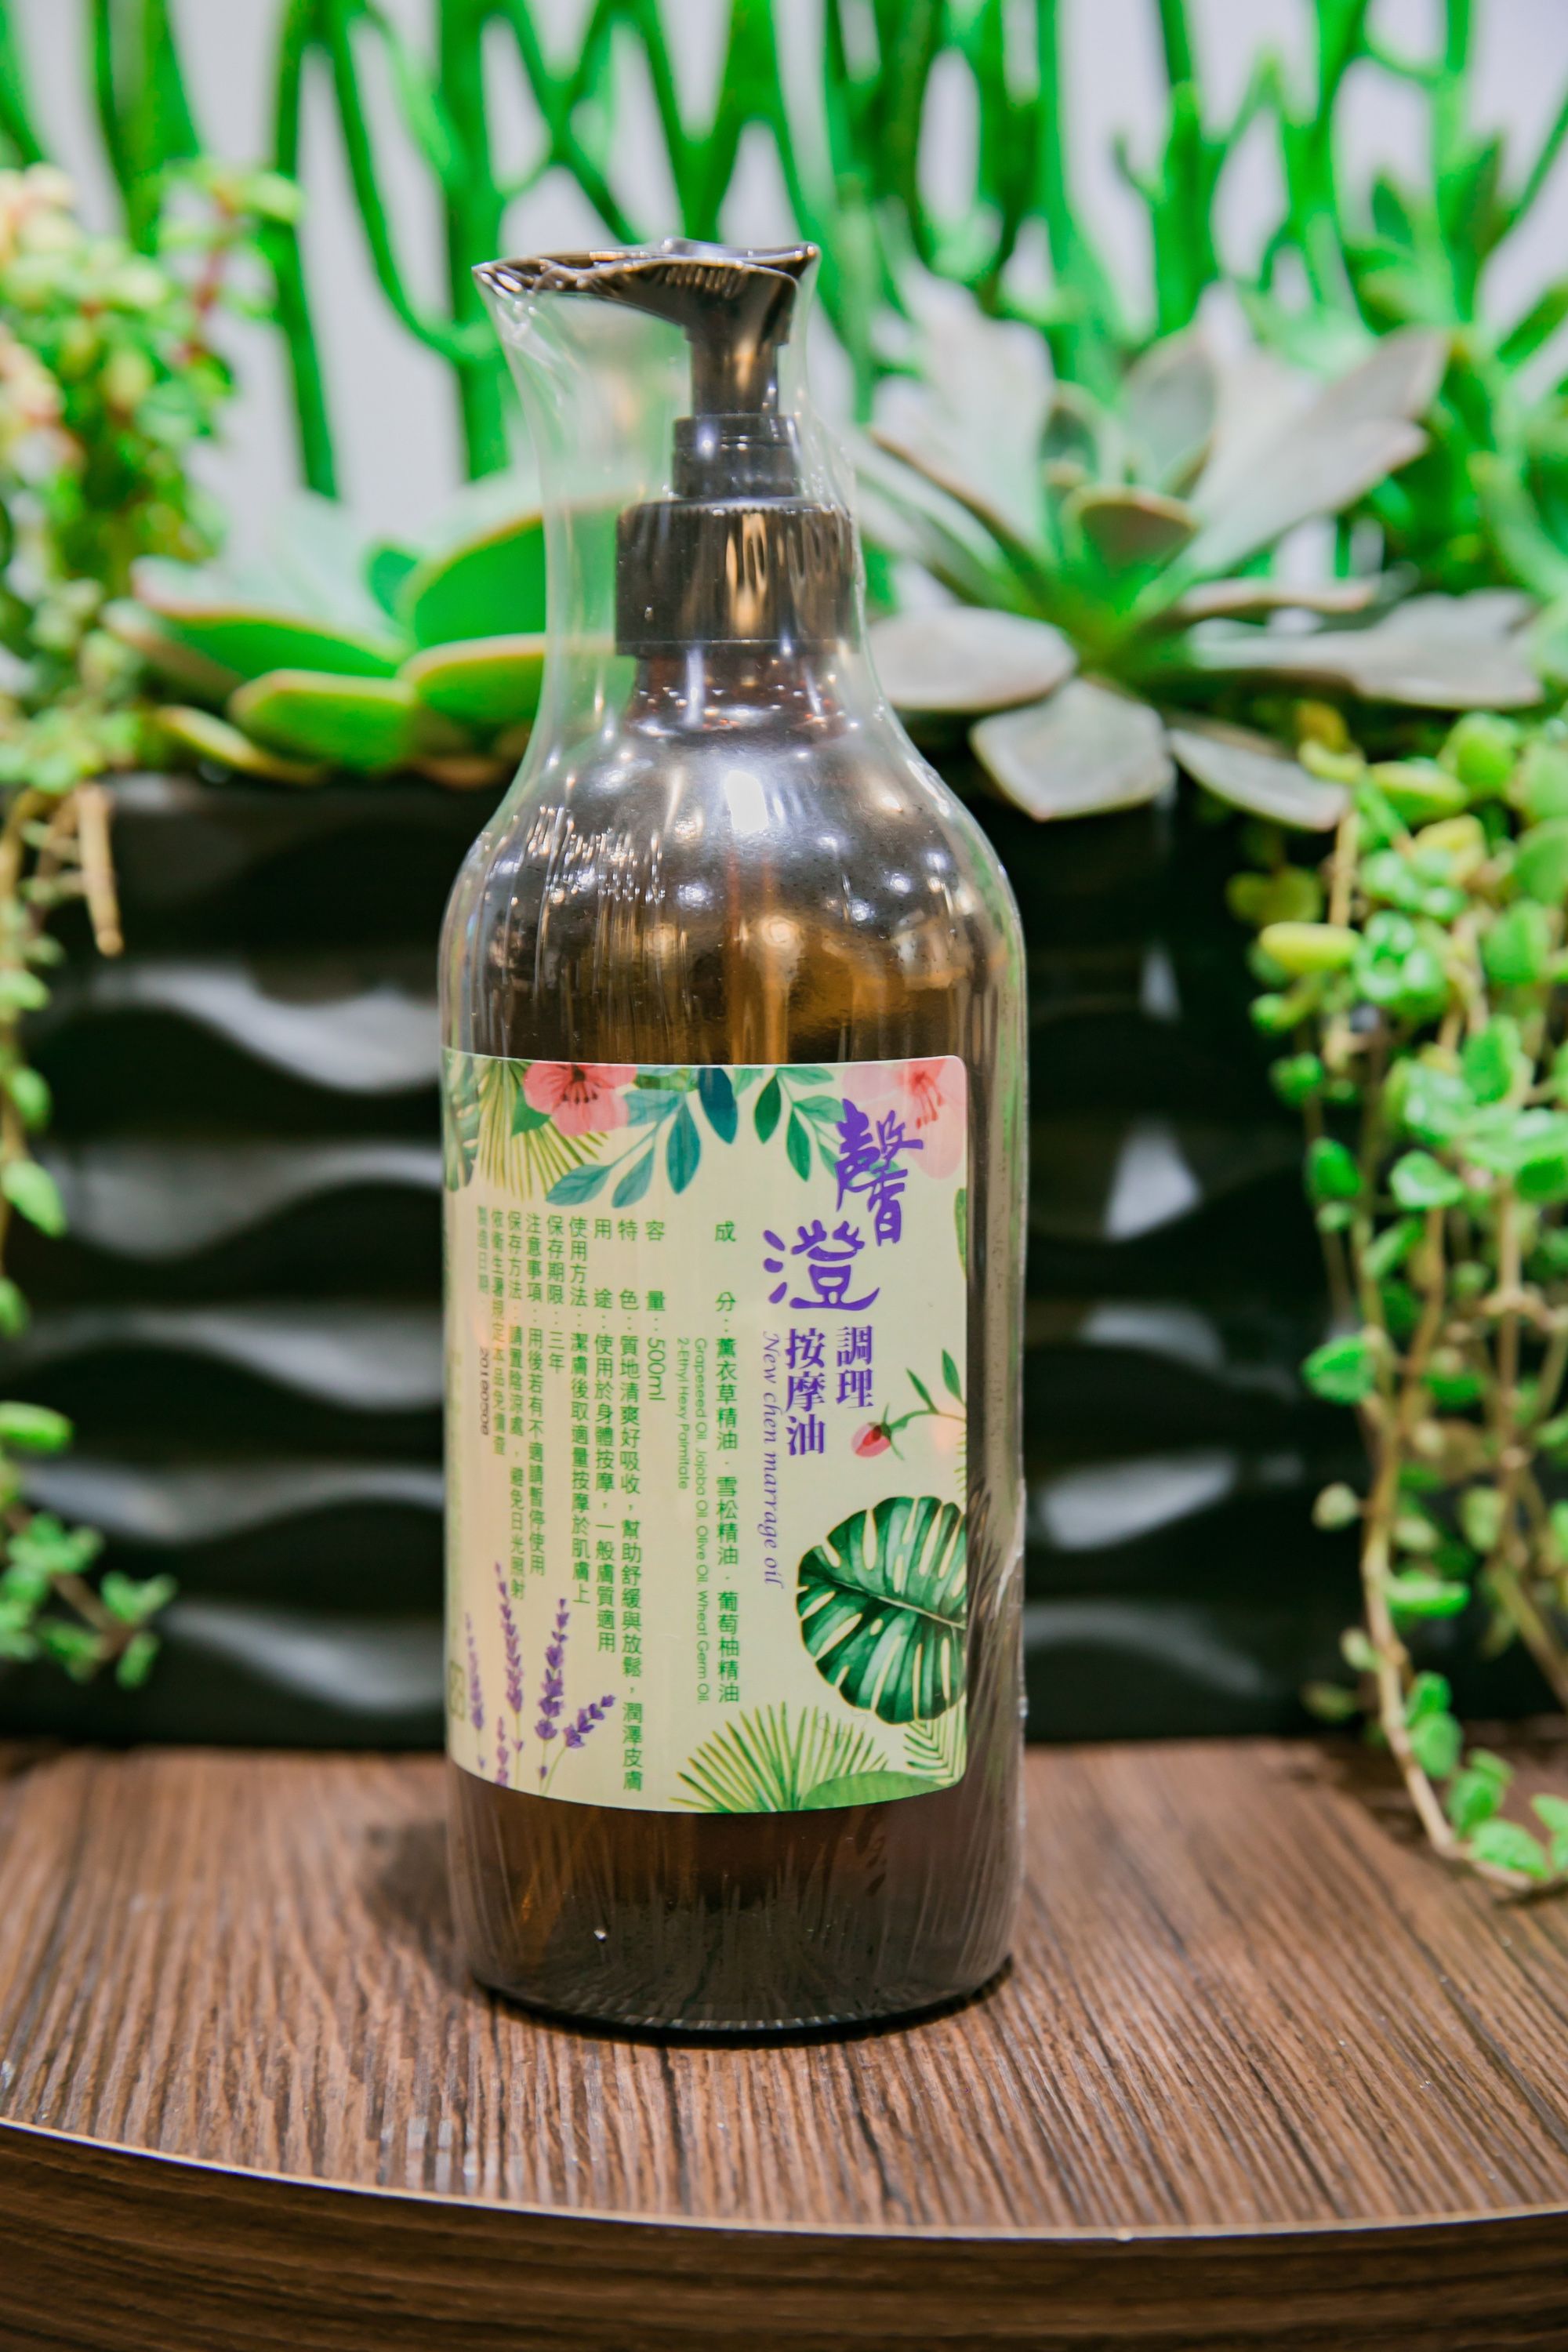 Xincheng conditioning massage oil